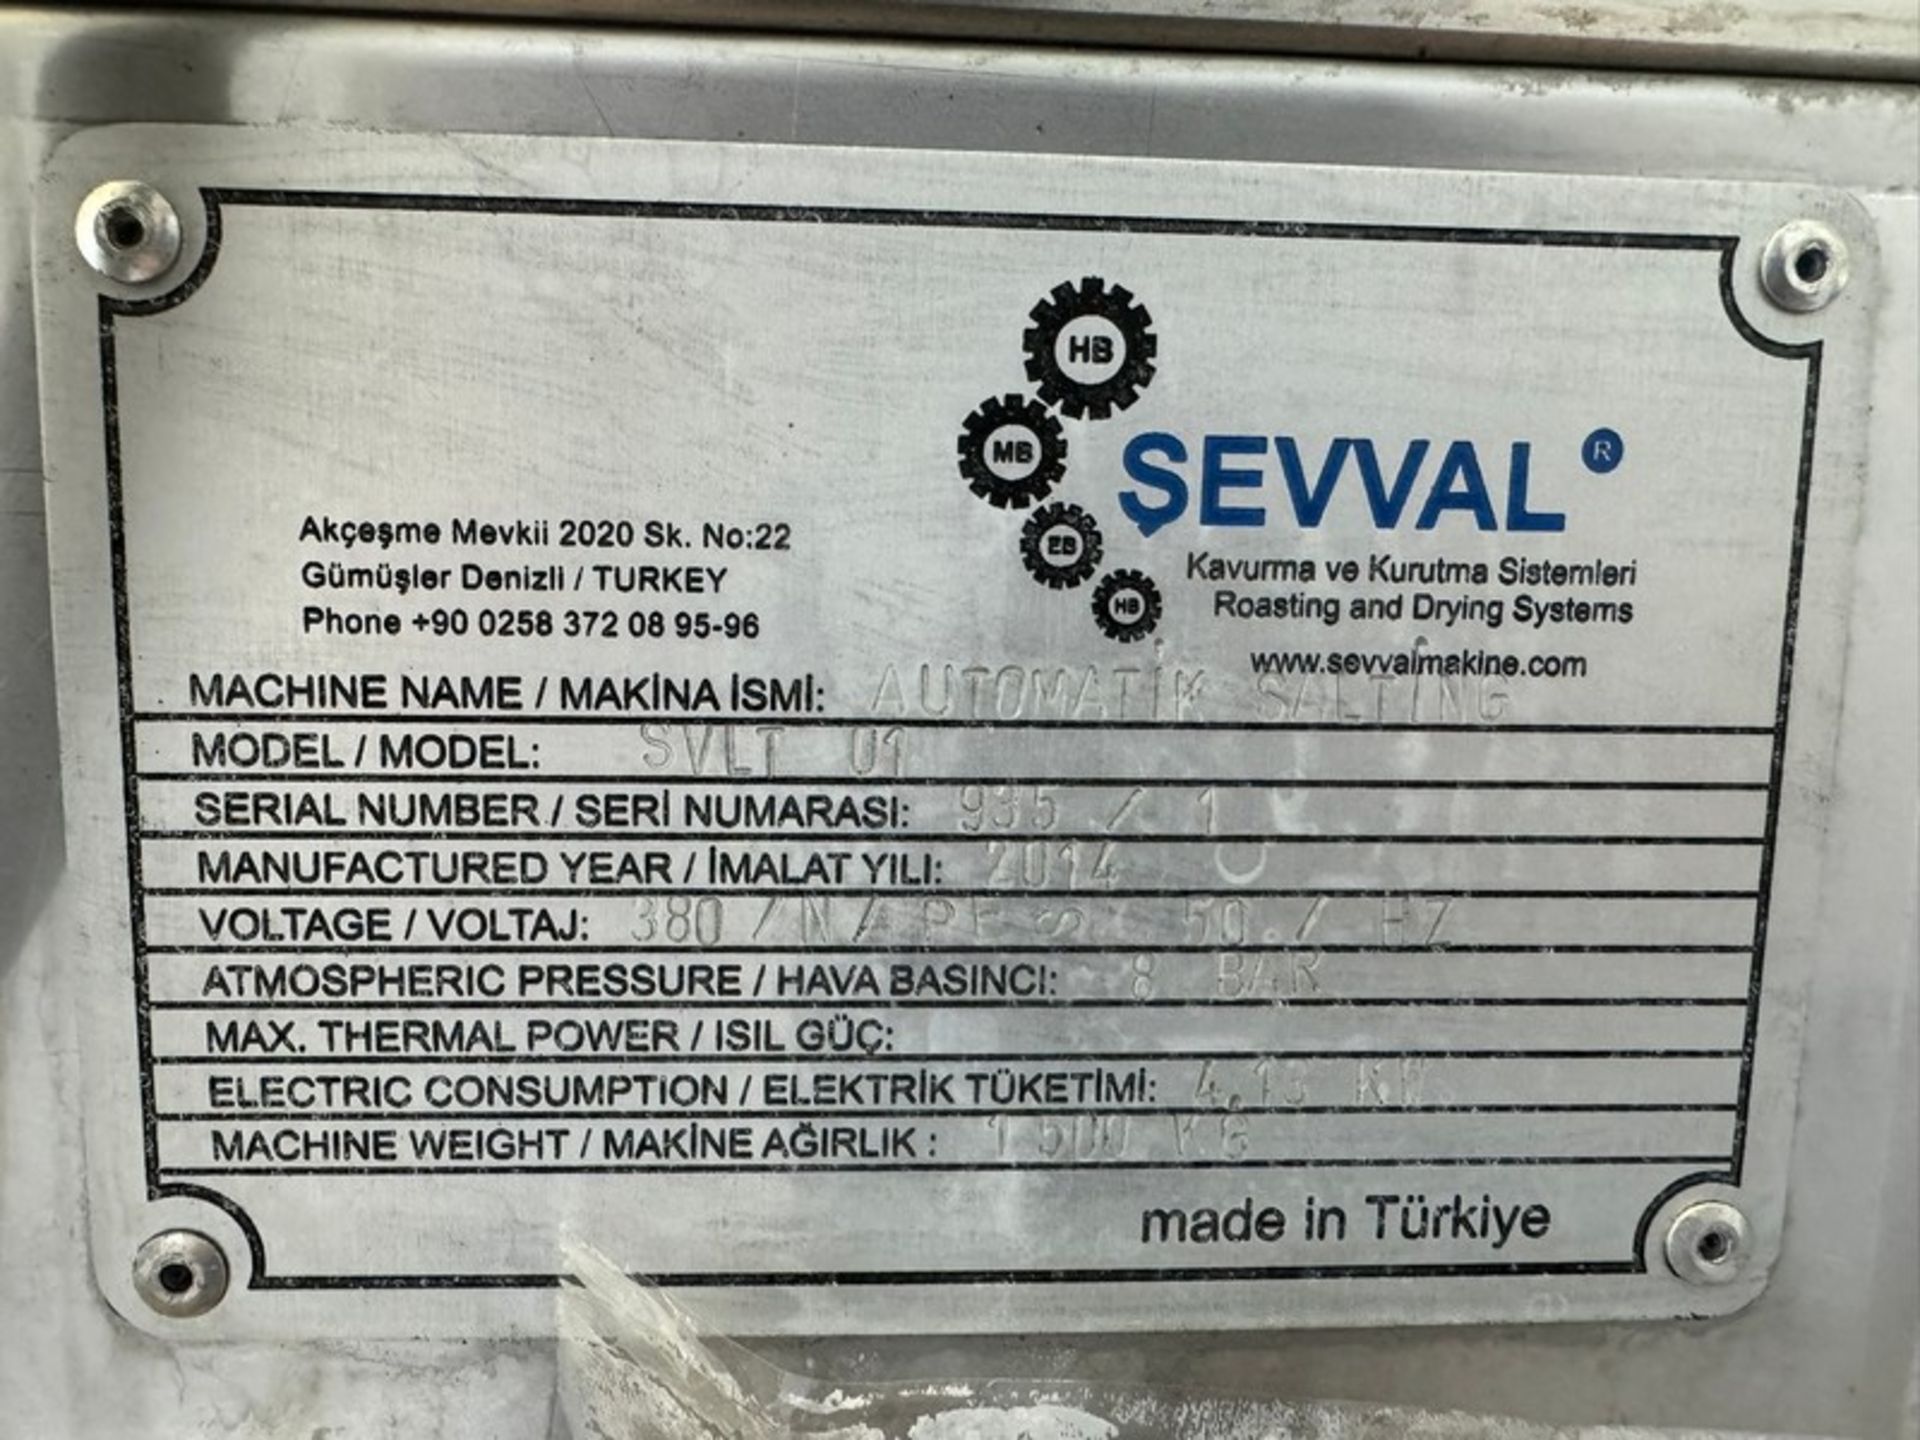 2014 SEVVAL Automatic Salter, M/N SVLT 01, S/N 935/1, 380 Volts (INV#104030) (Located @ the MDG - Image 7 of 10